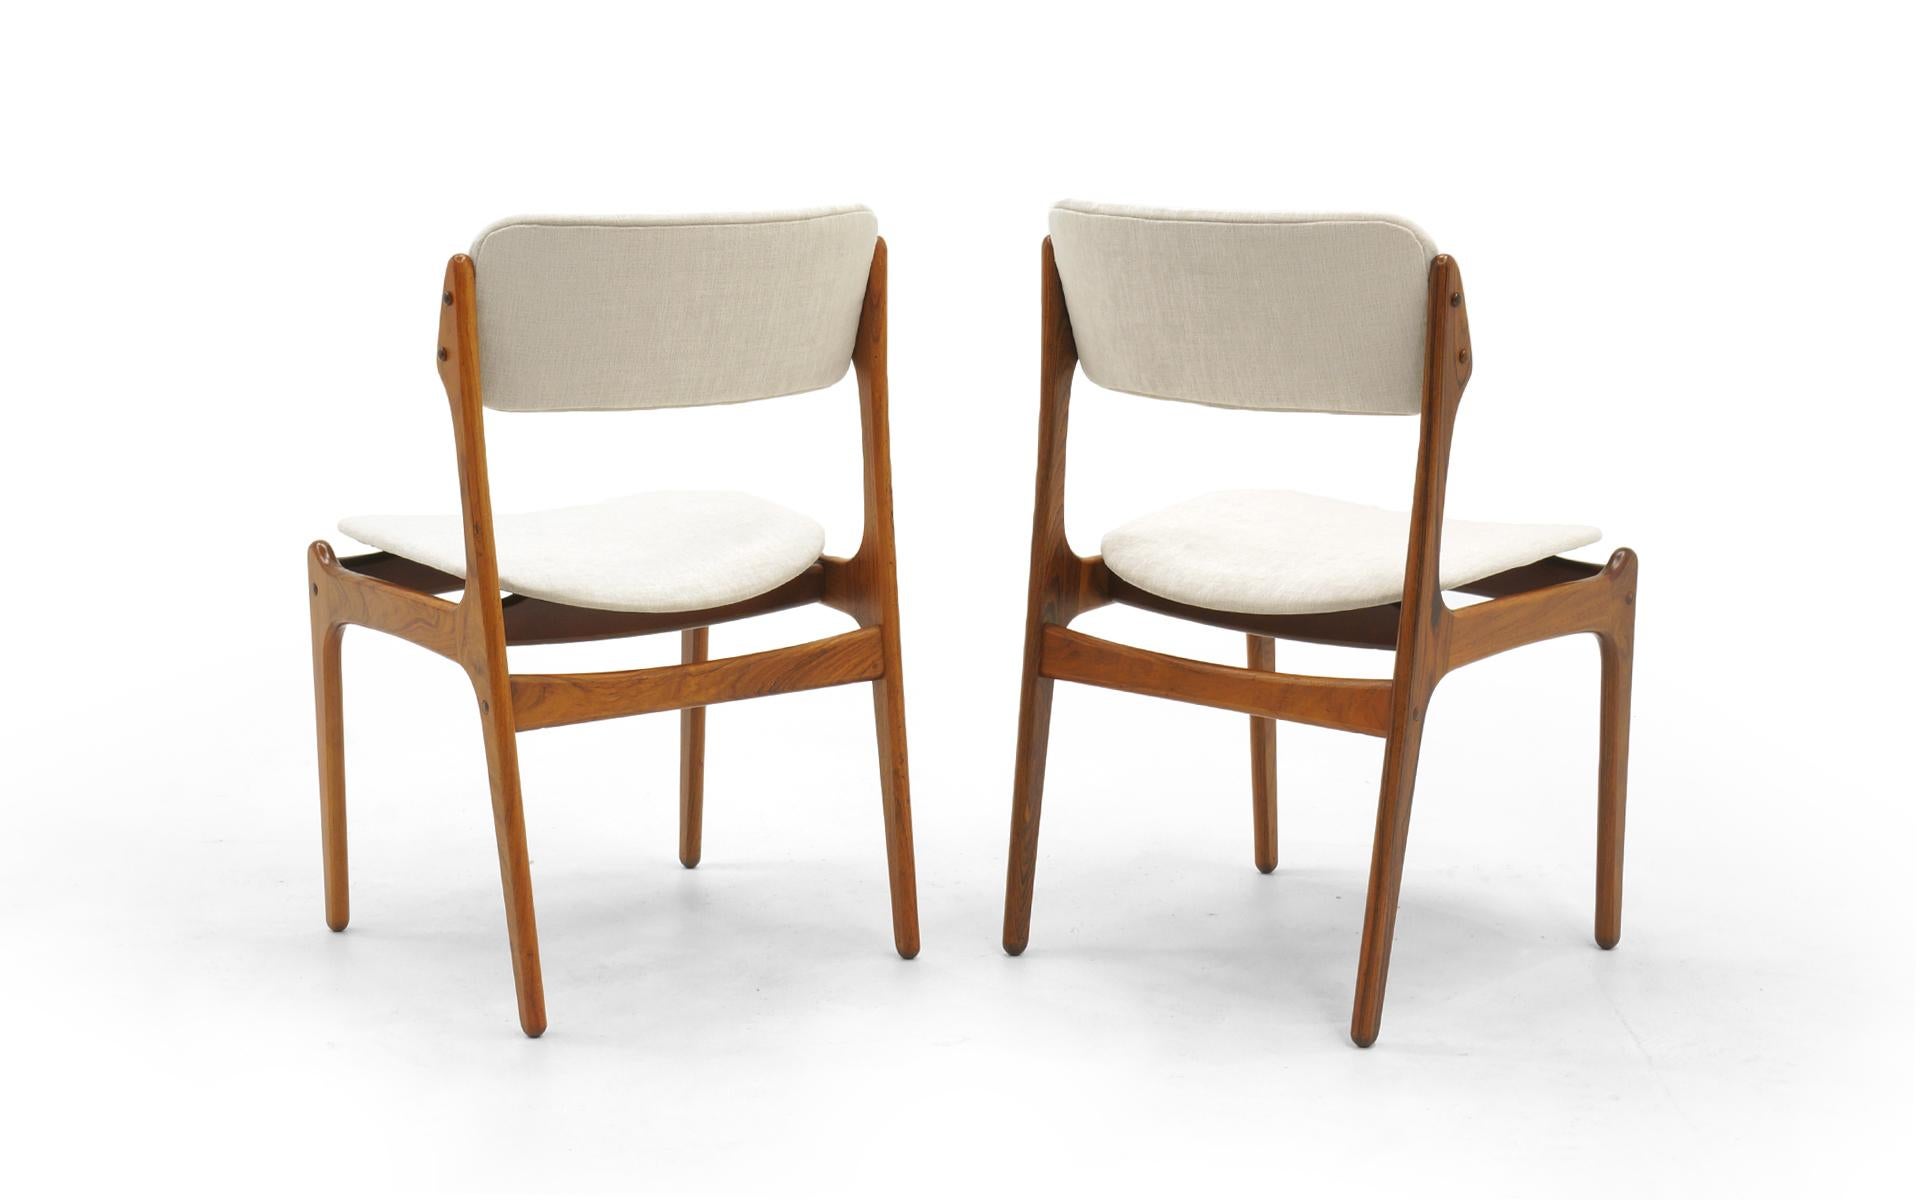 Upholstery Set of Eight Dining Chairs, Rosewood by Danish Modern Designer Erik Buch